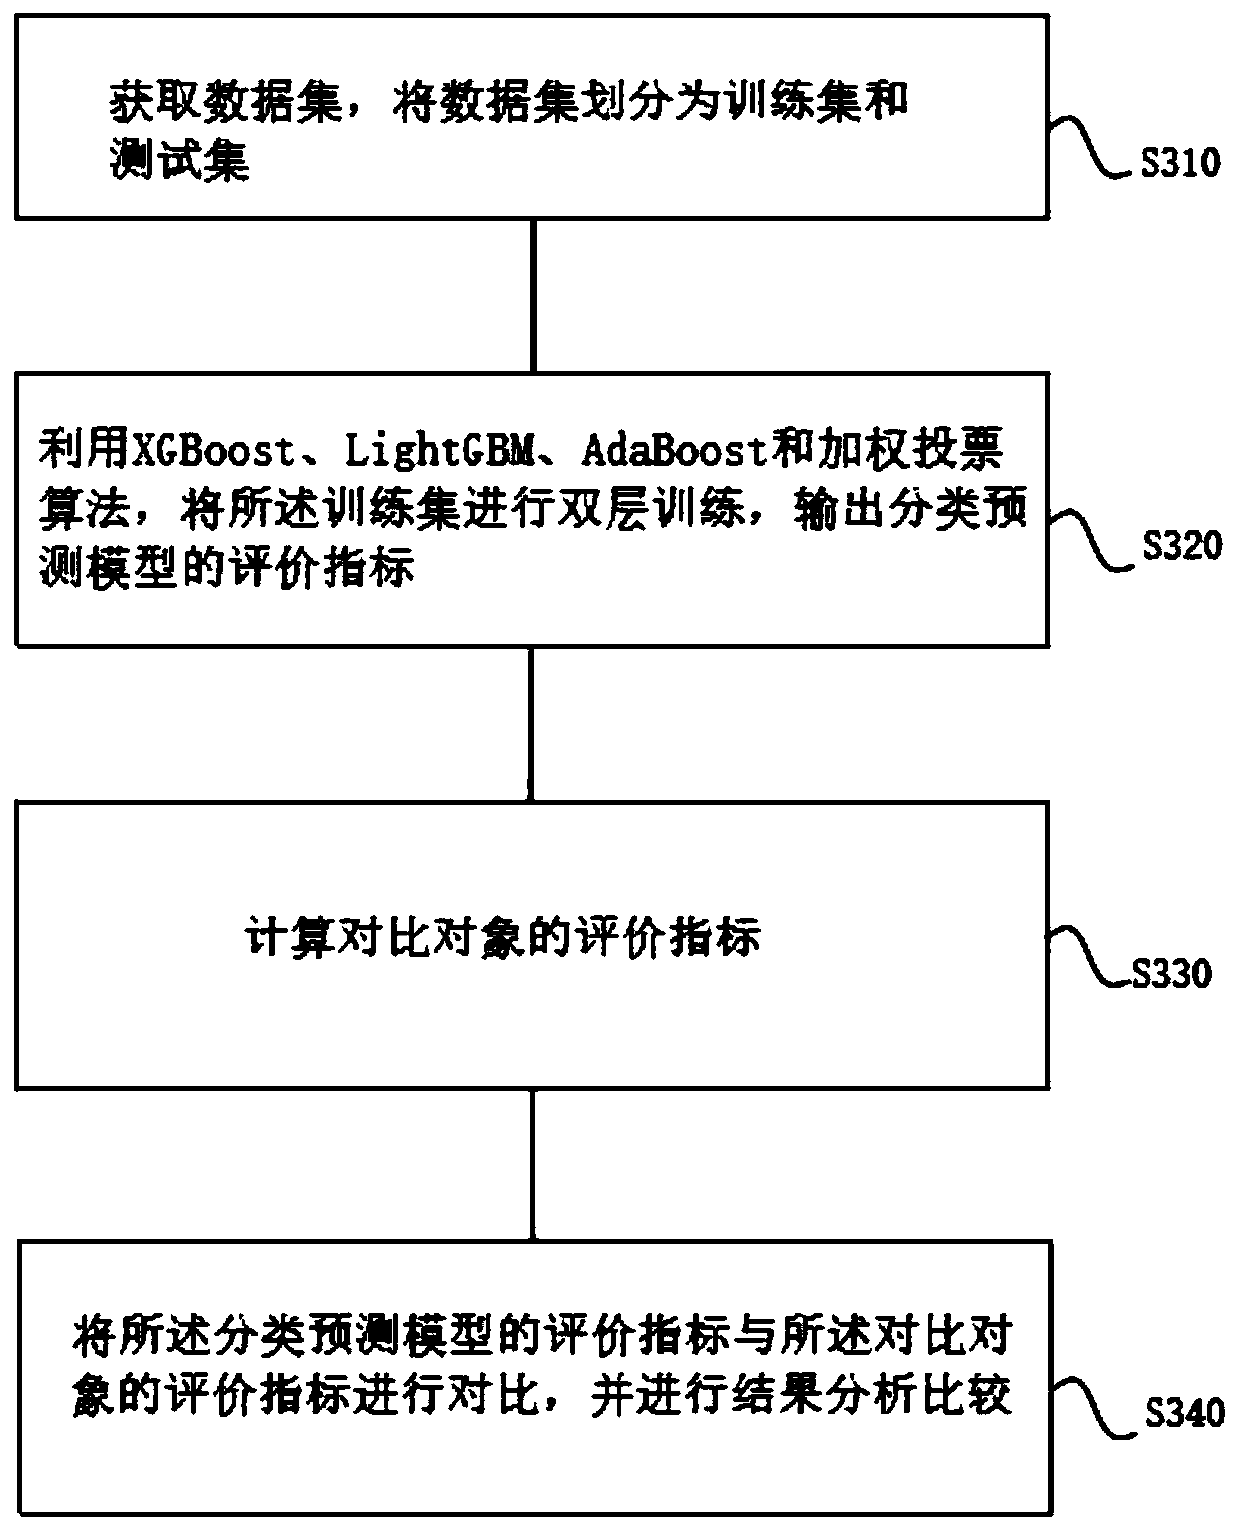 Enterprise information loss prediction method of double-layer structure